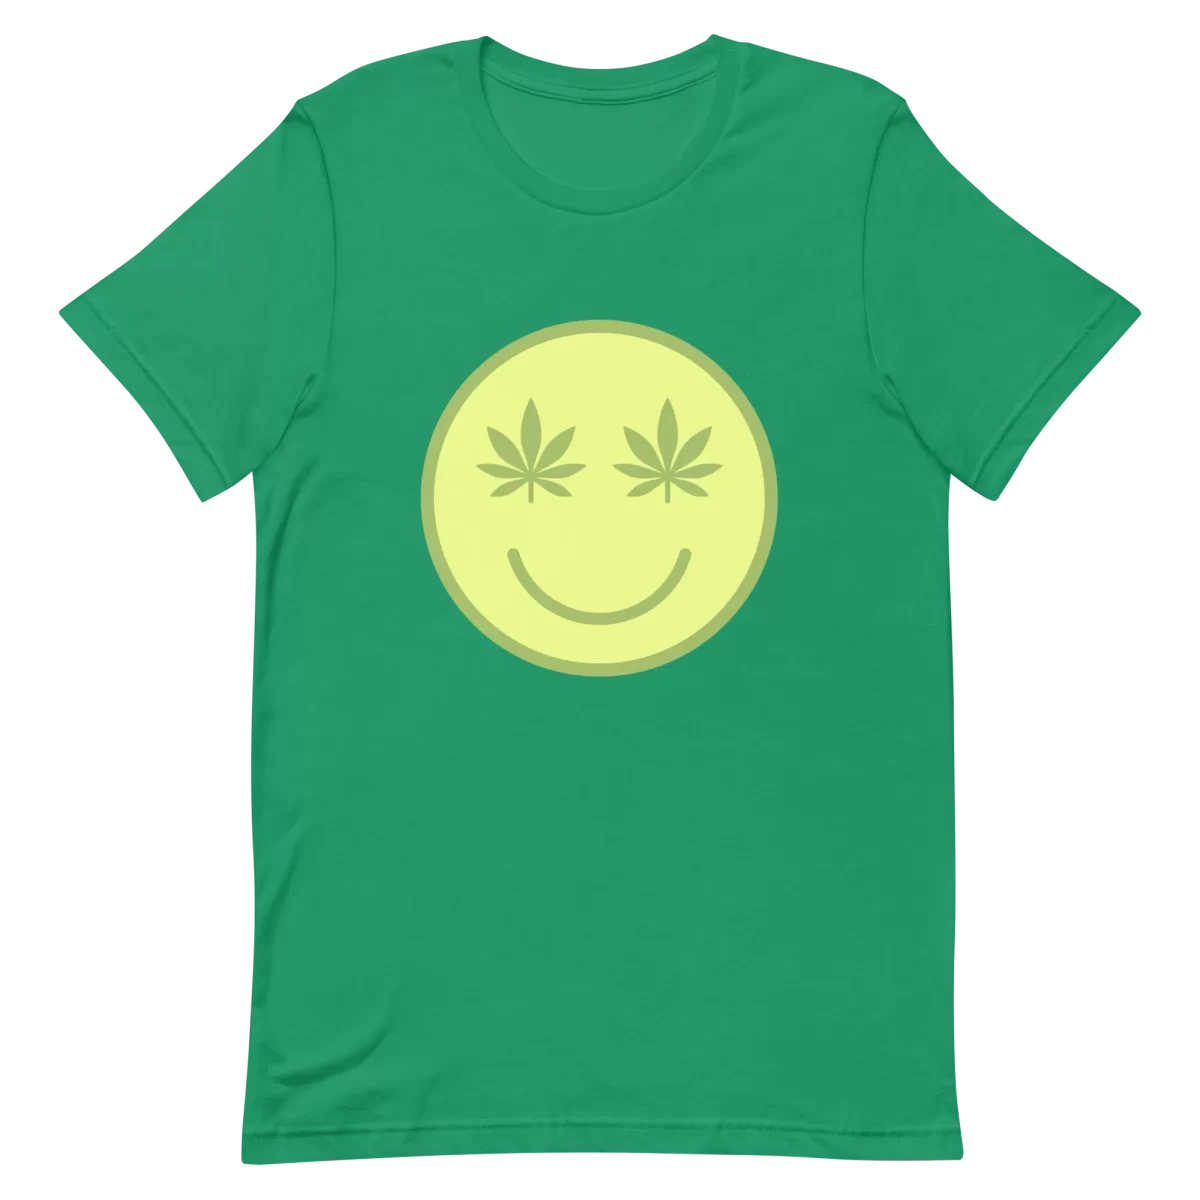 Unisex T-Shirt - Smiley Face with weed - Kelly